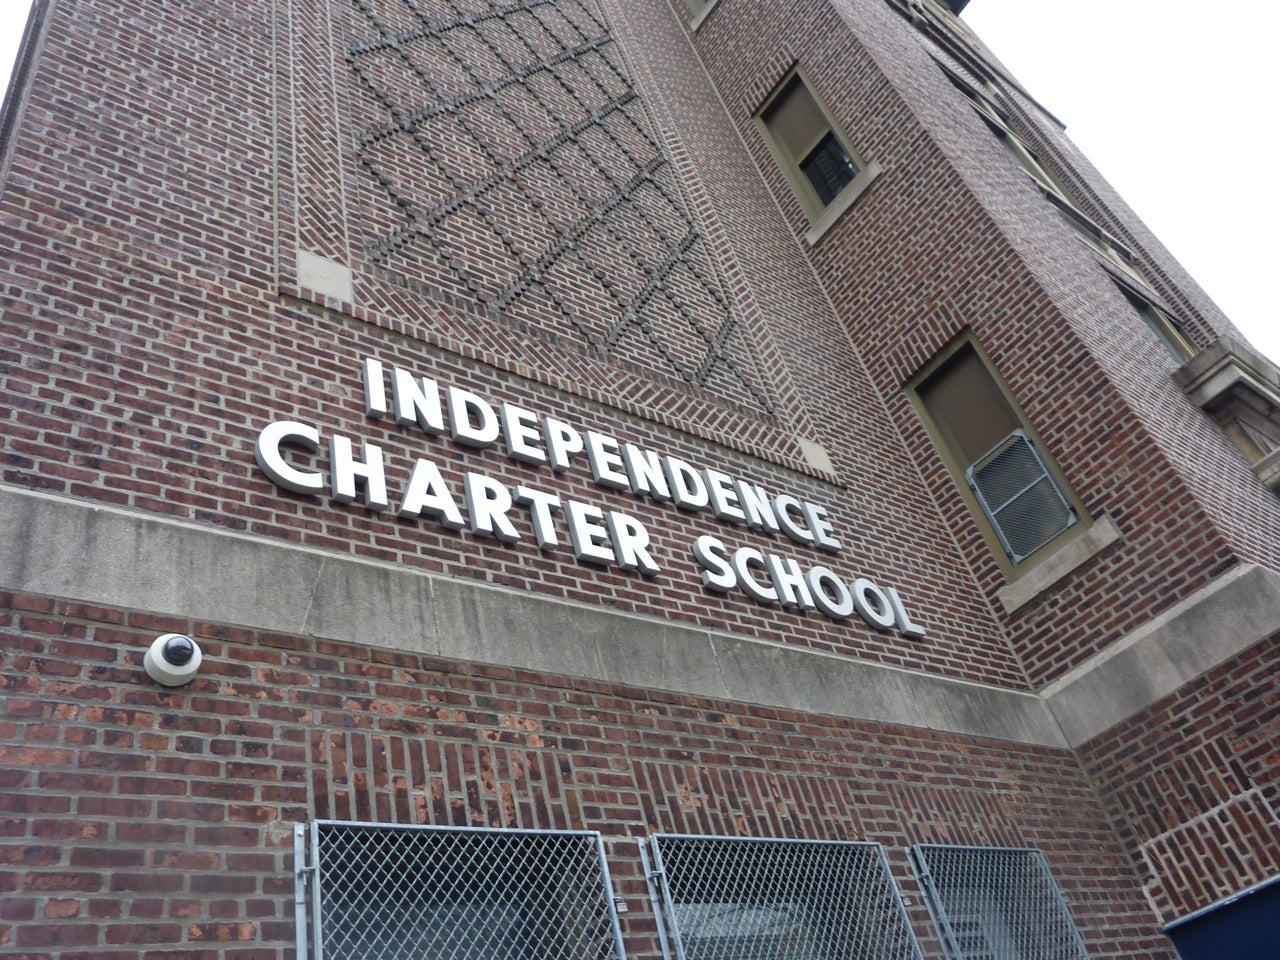 Independence Charter